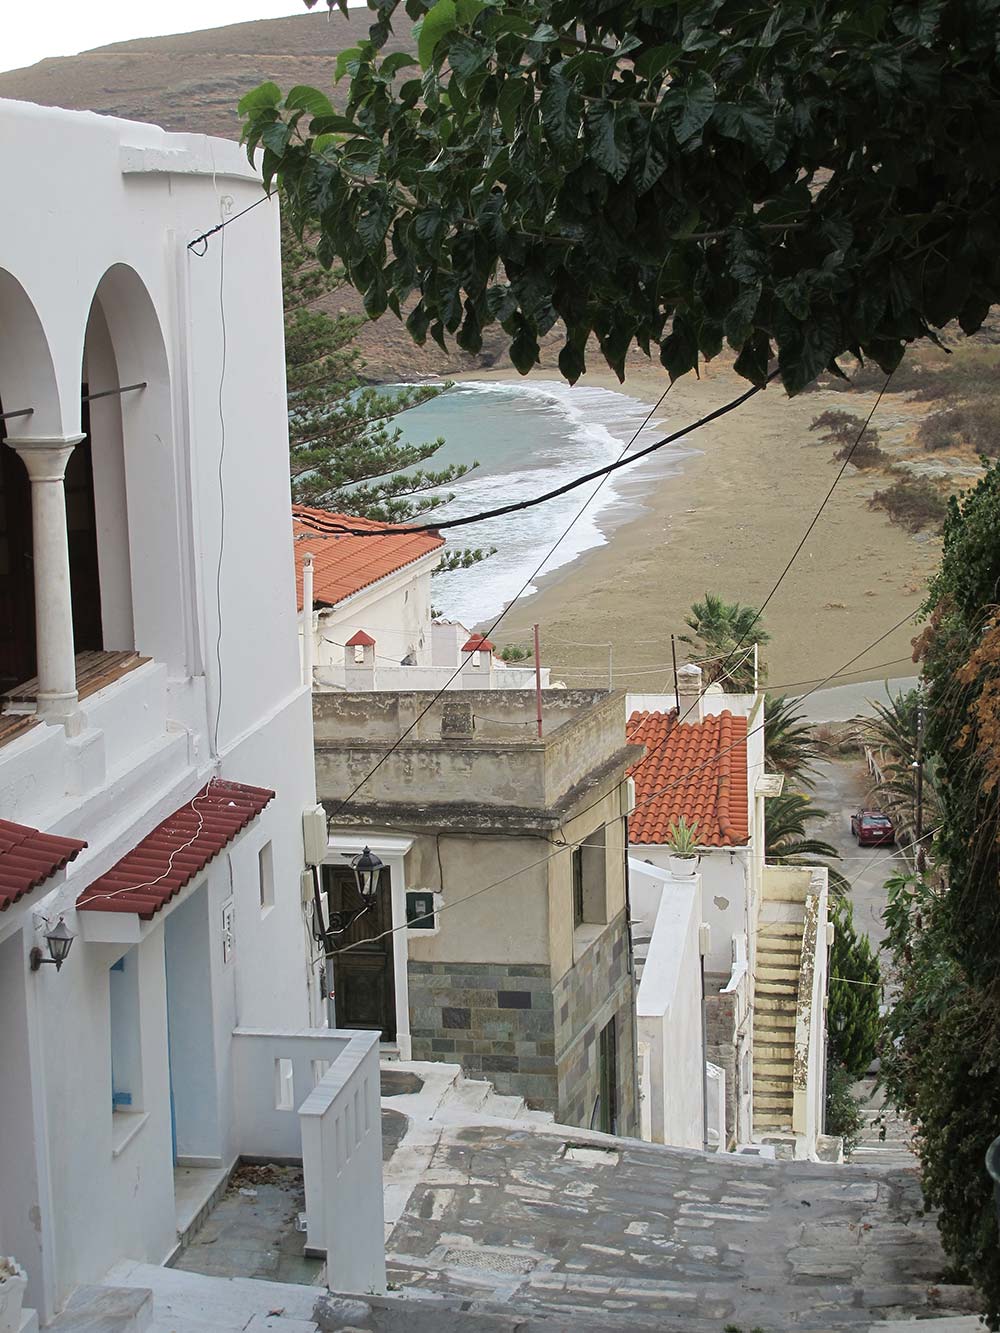 Image of Chora, Andros